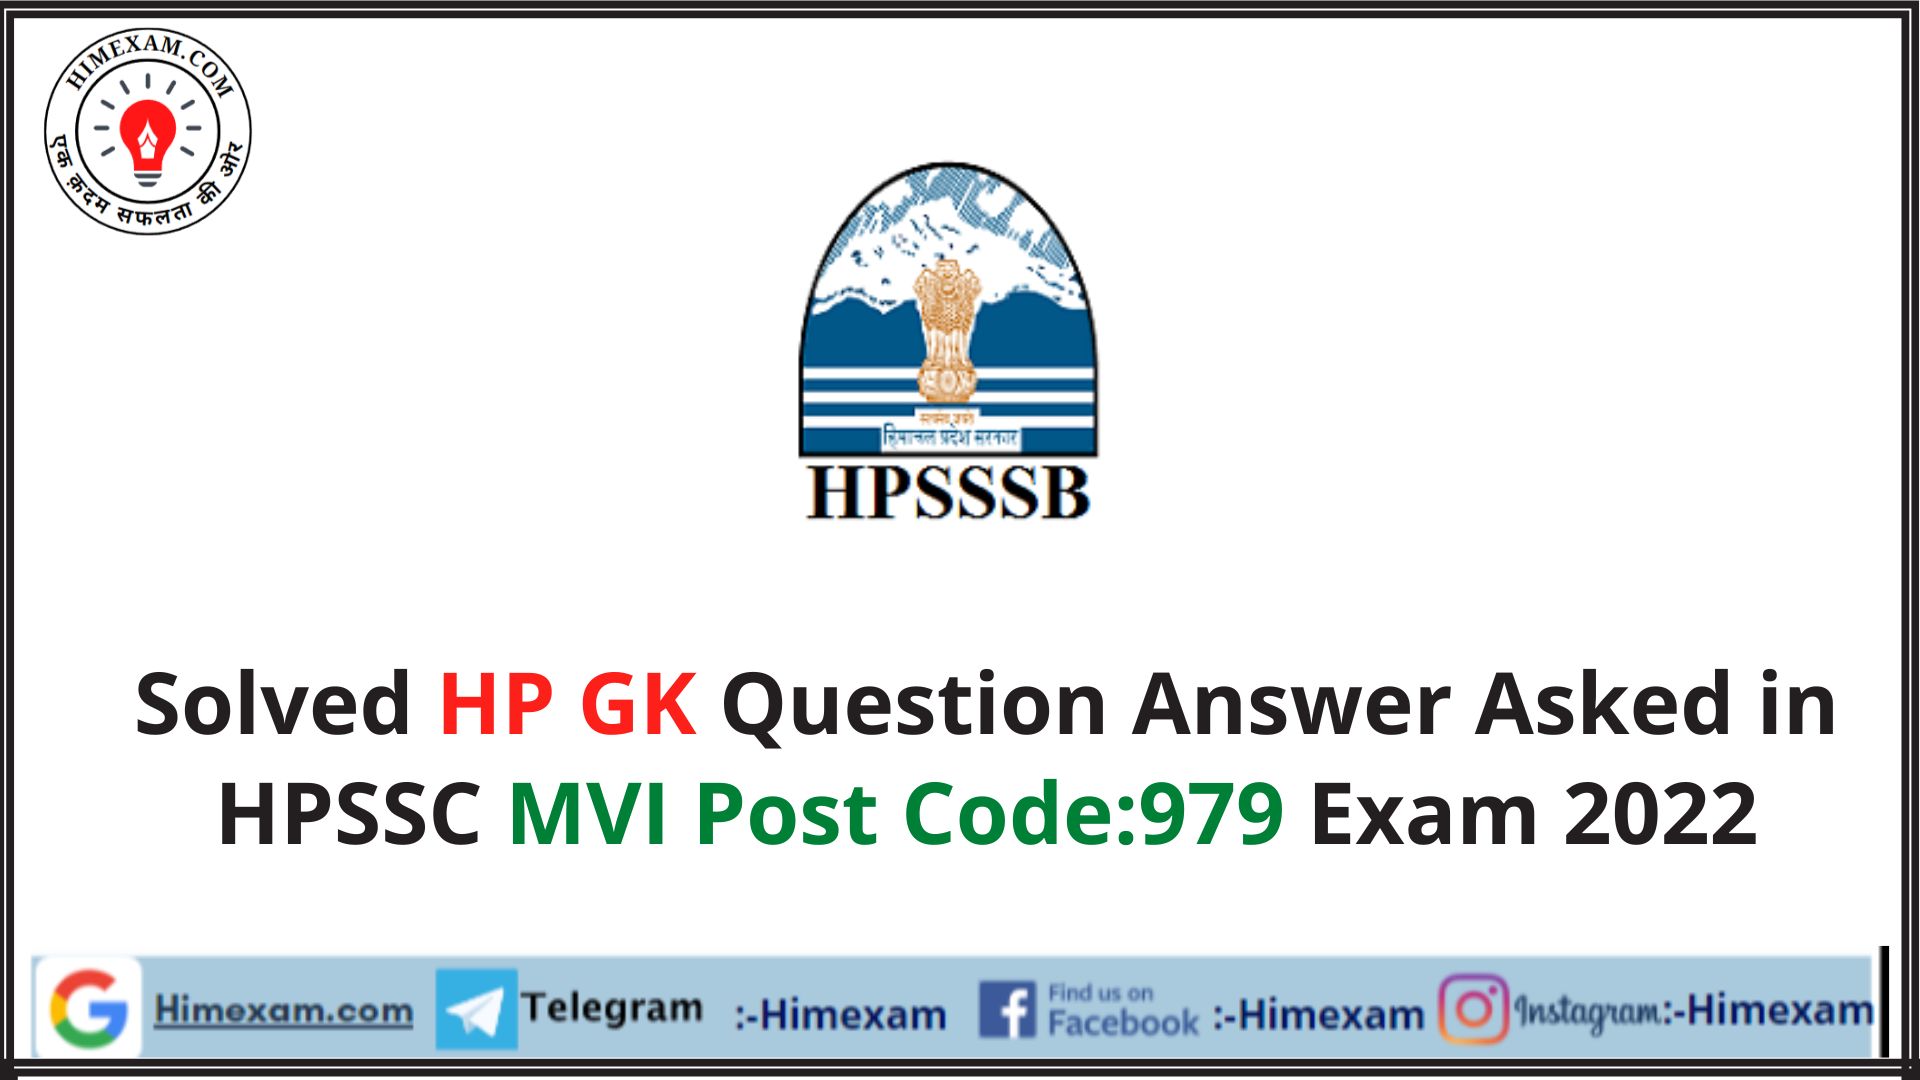 Solved HP GK Question Answer Asked in HPSSC MVI Post Code:979 Exam 2022